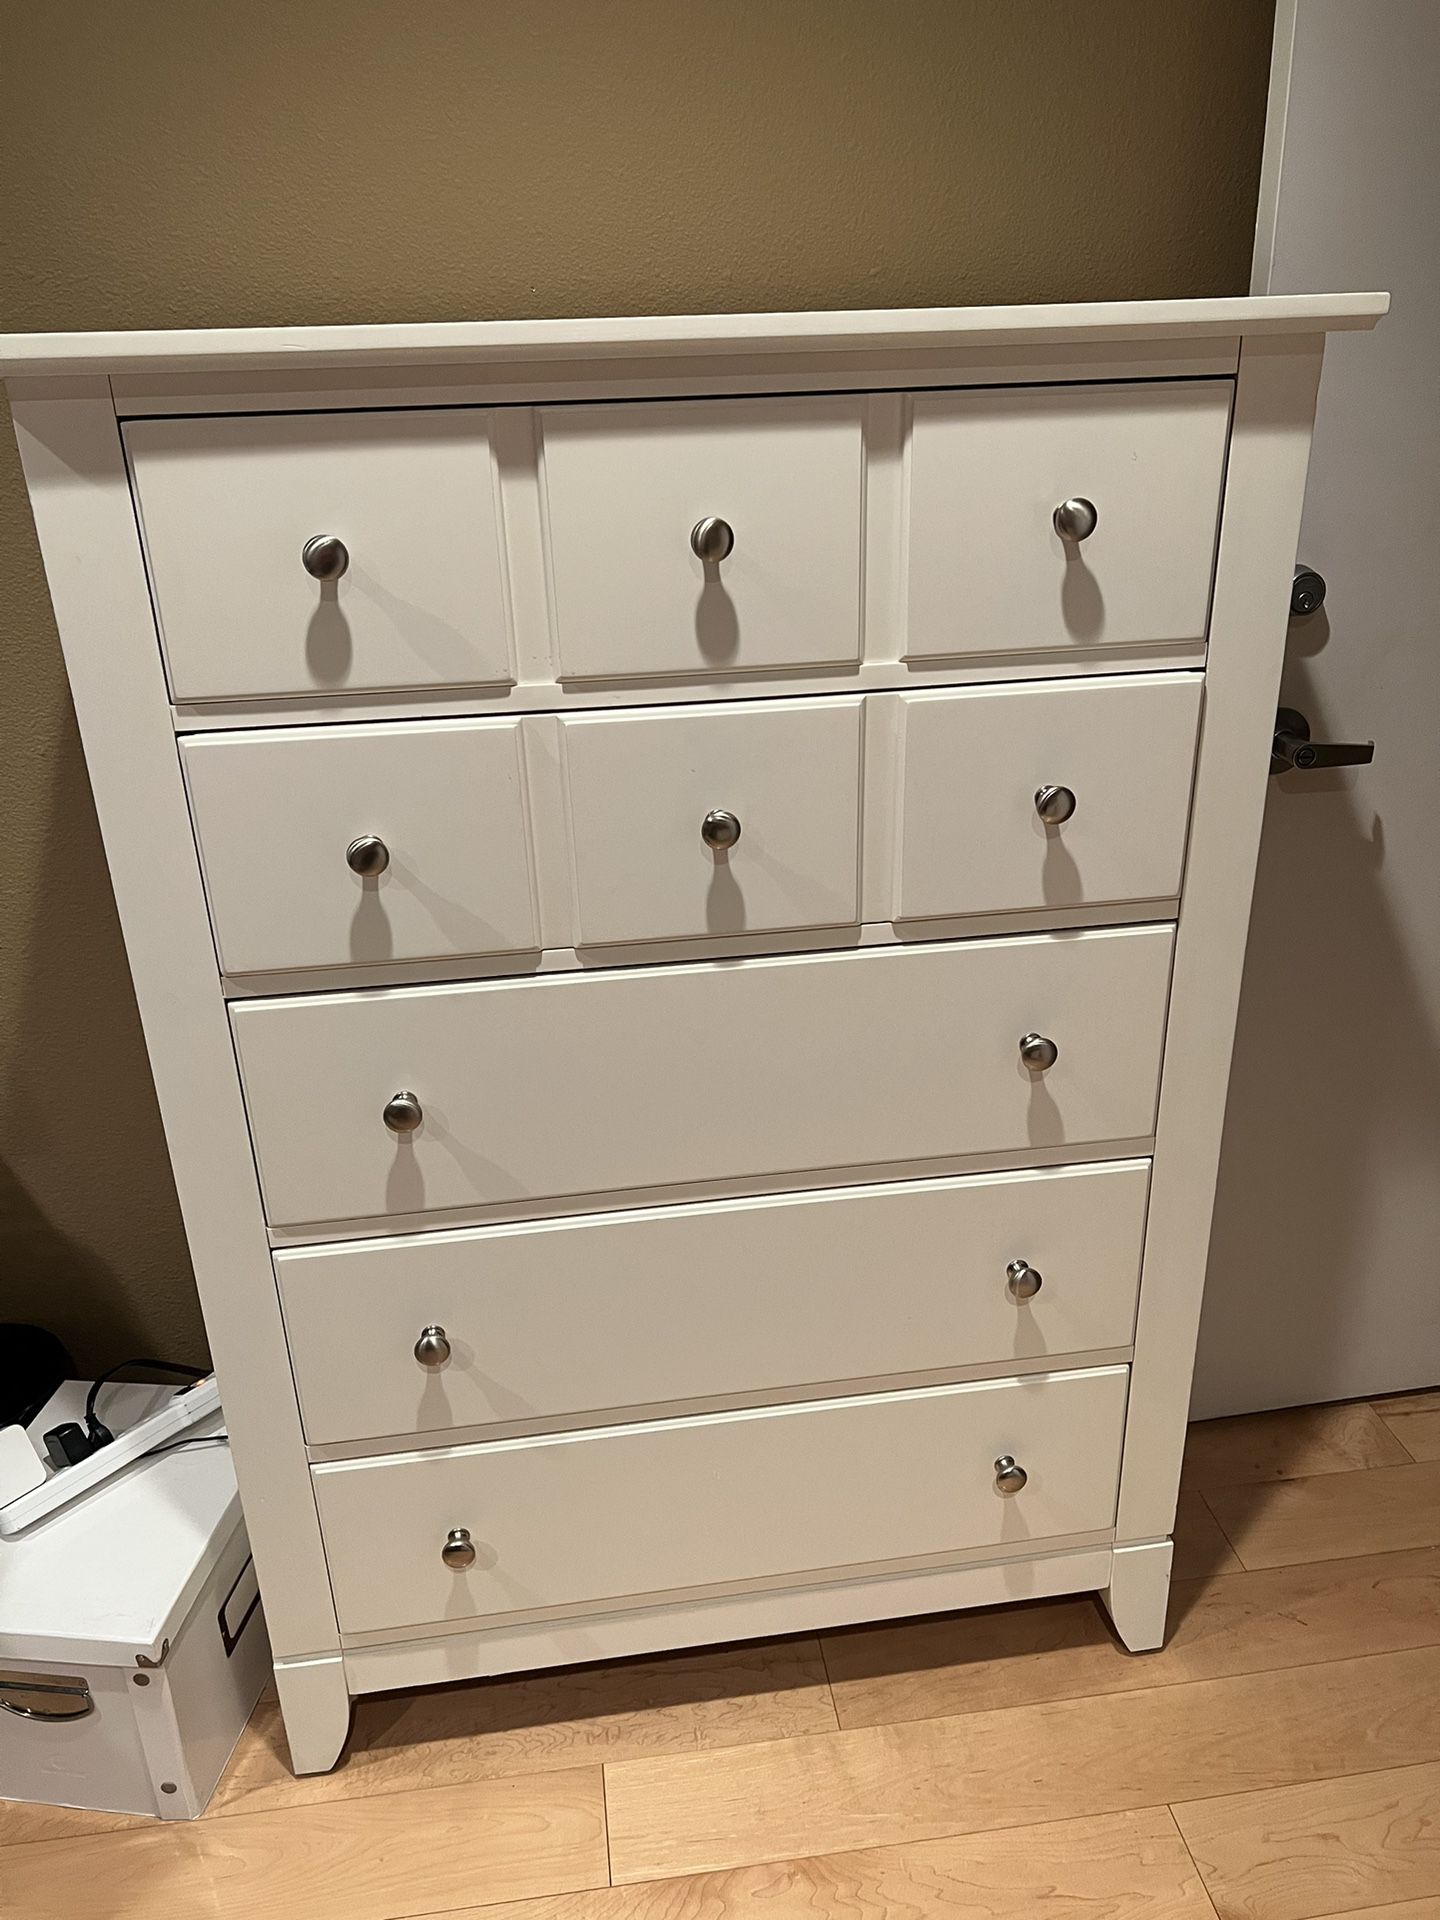 Pair Of Dressers - Practically Brand New